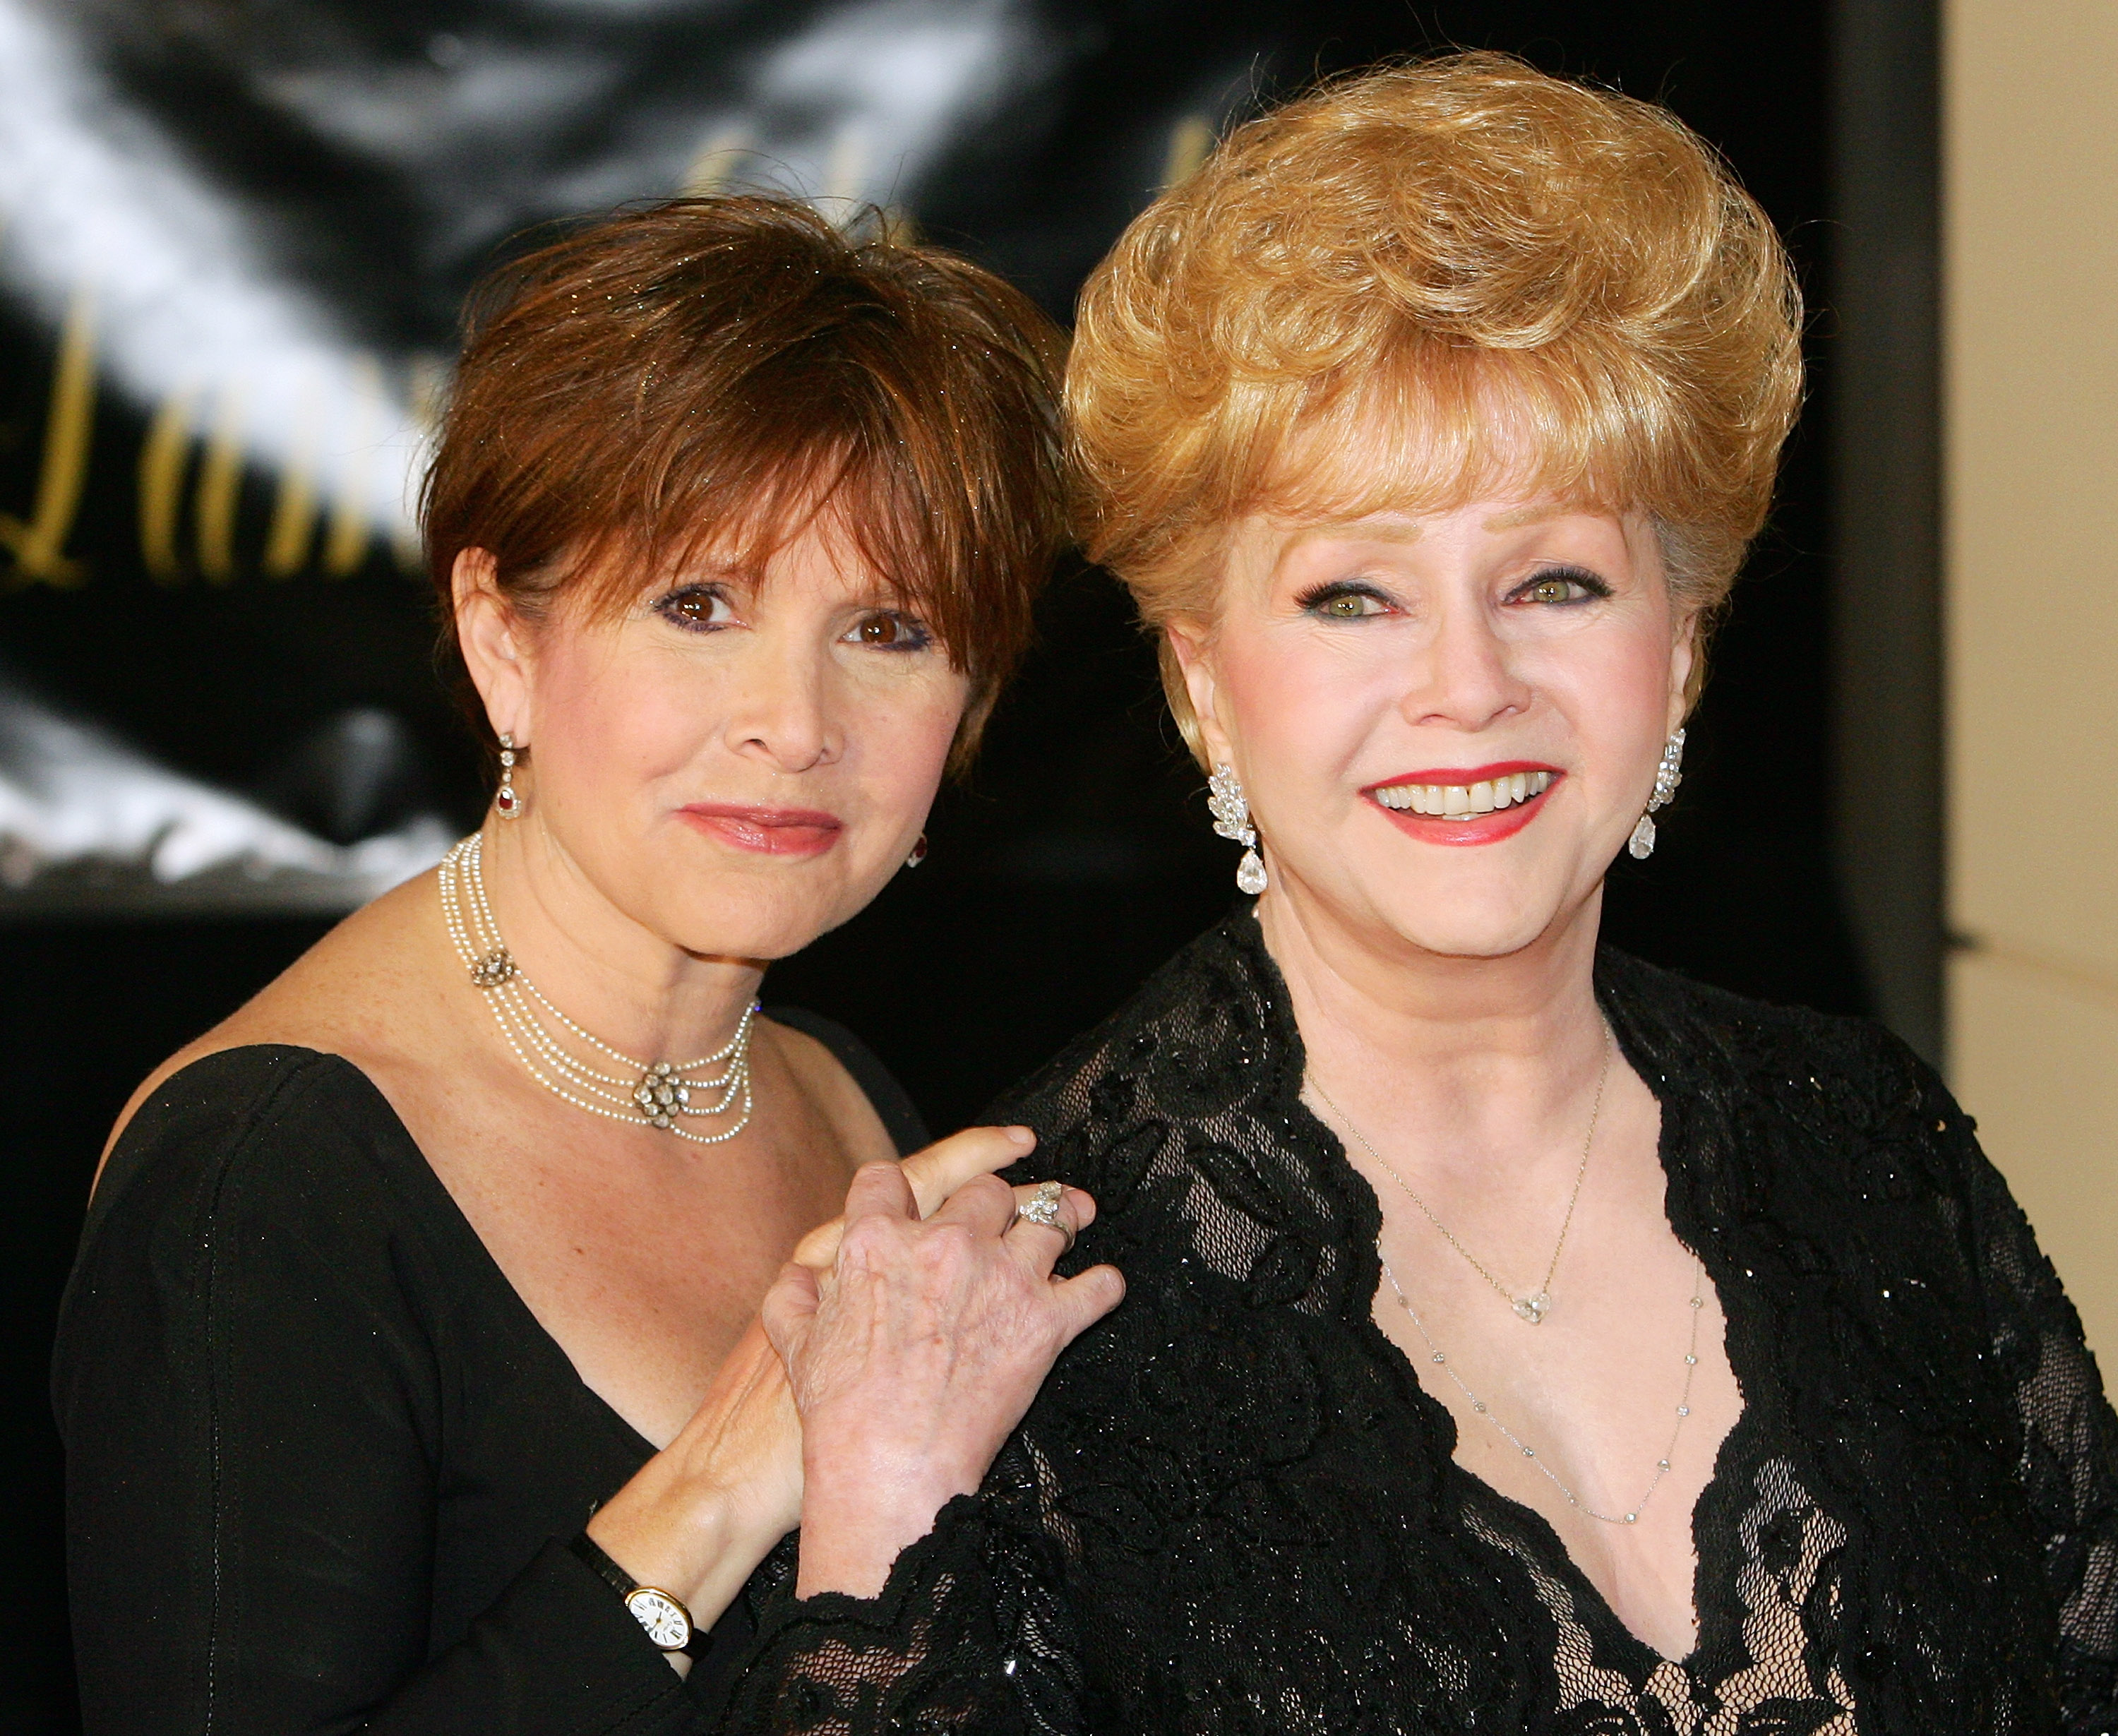 Carrie Fisher and her mother, Debbie Reynolds on February 27, 2007 in Henderson, Nevada. | Source: Getty Images